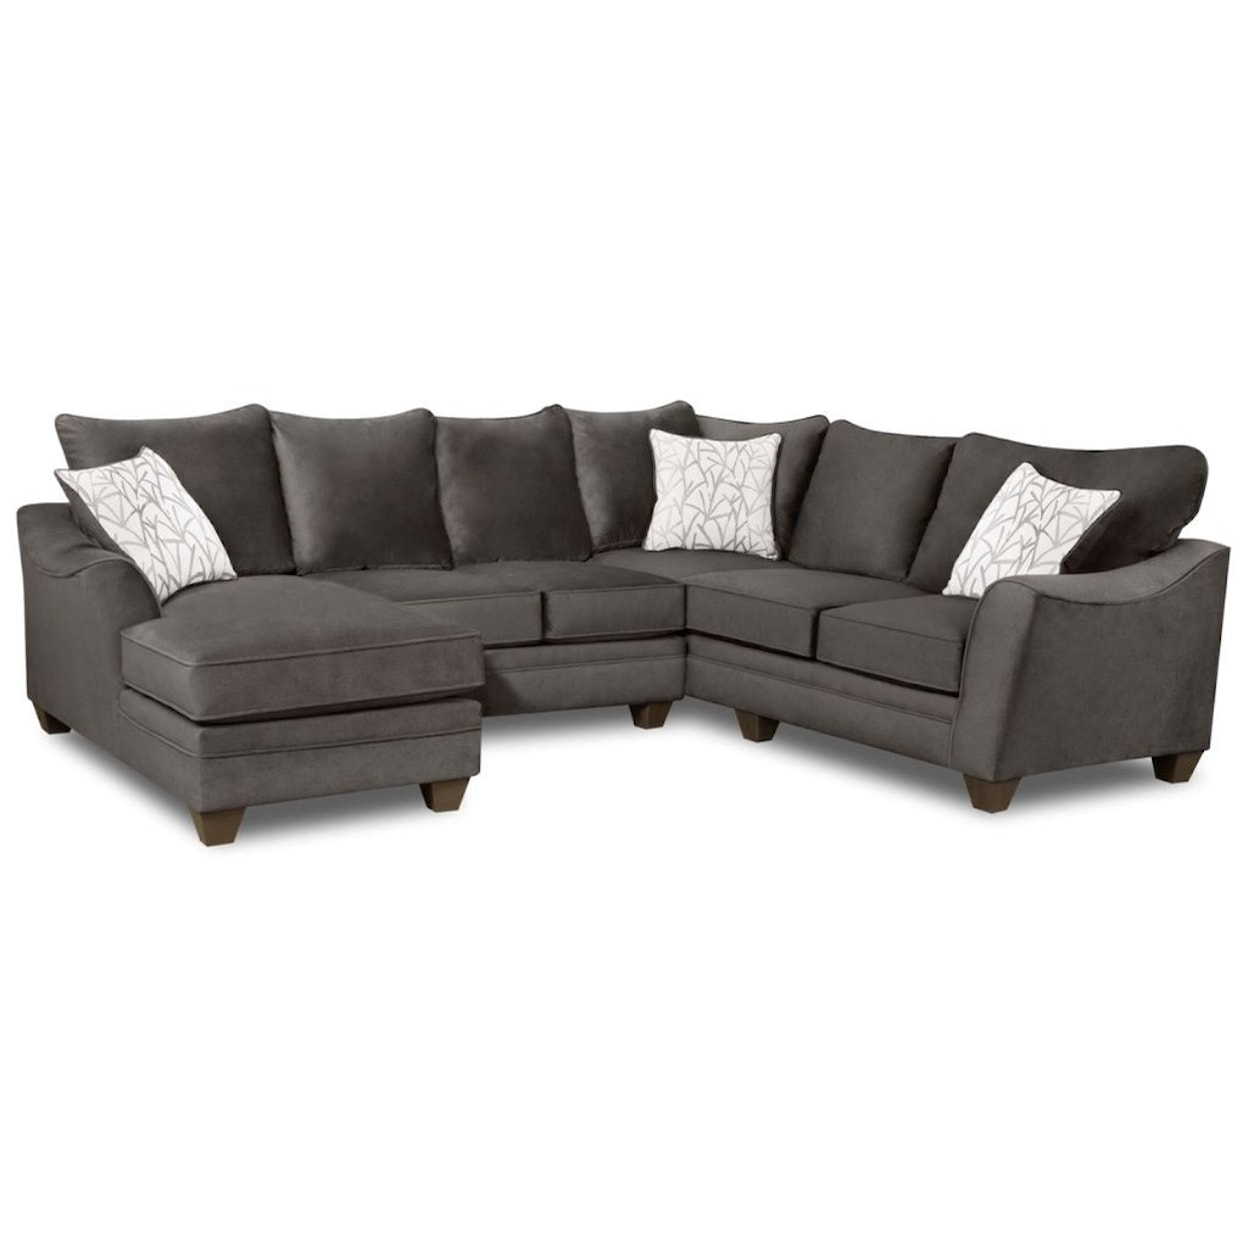 Peak Living 3810 Sectional Sofa with Left Side Chaise